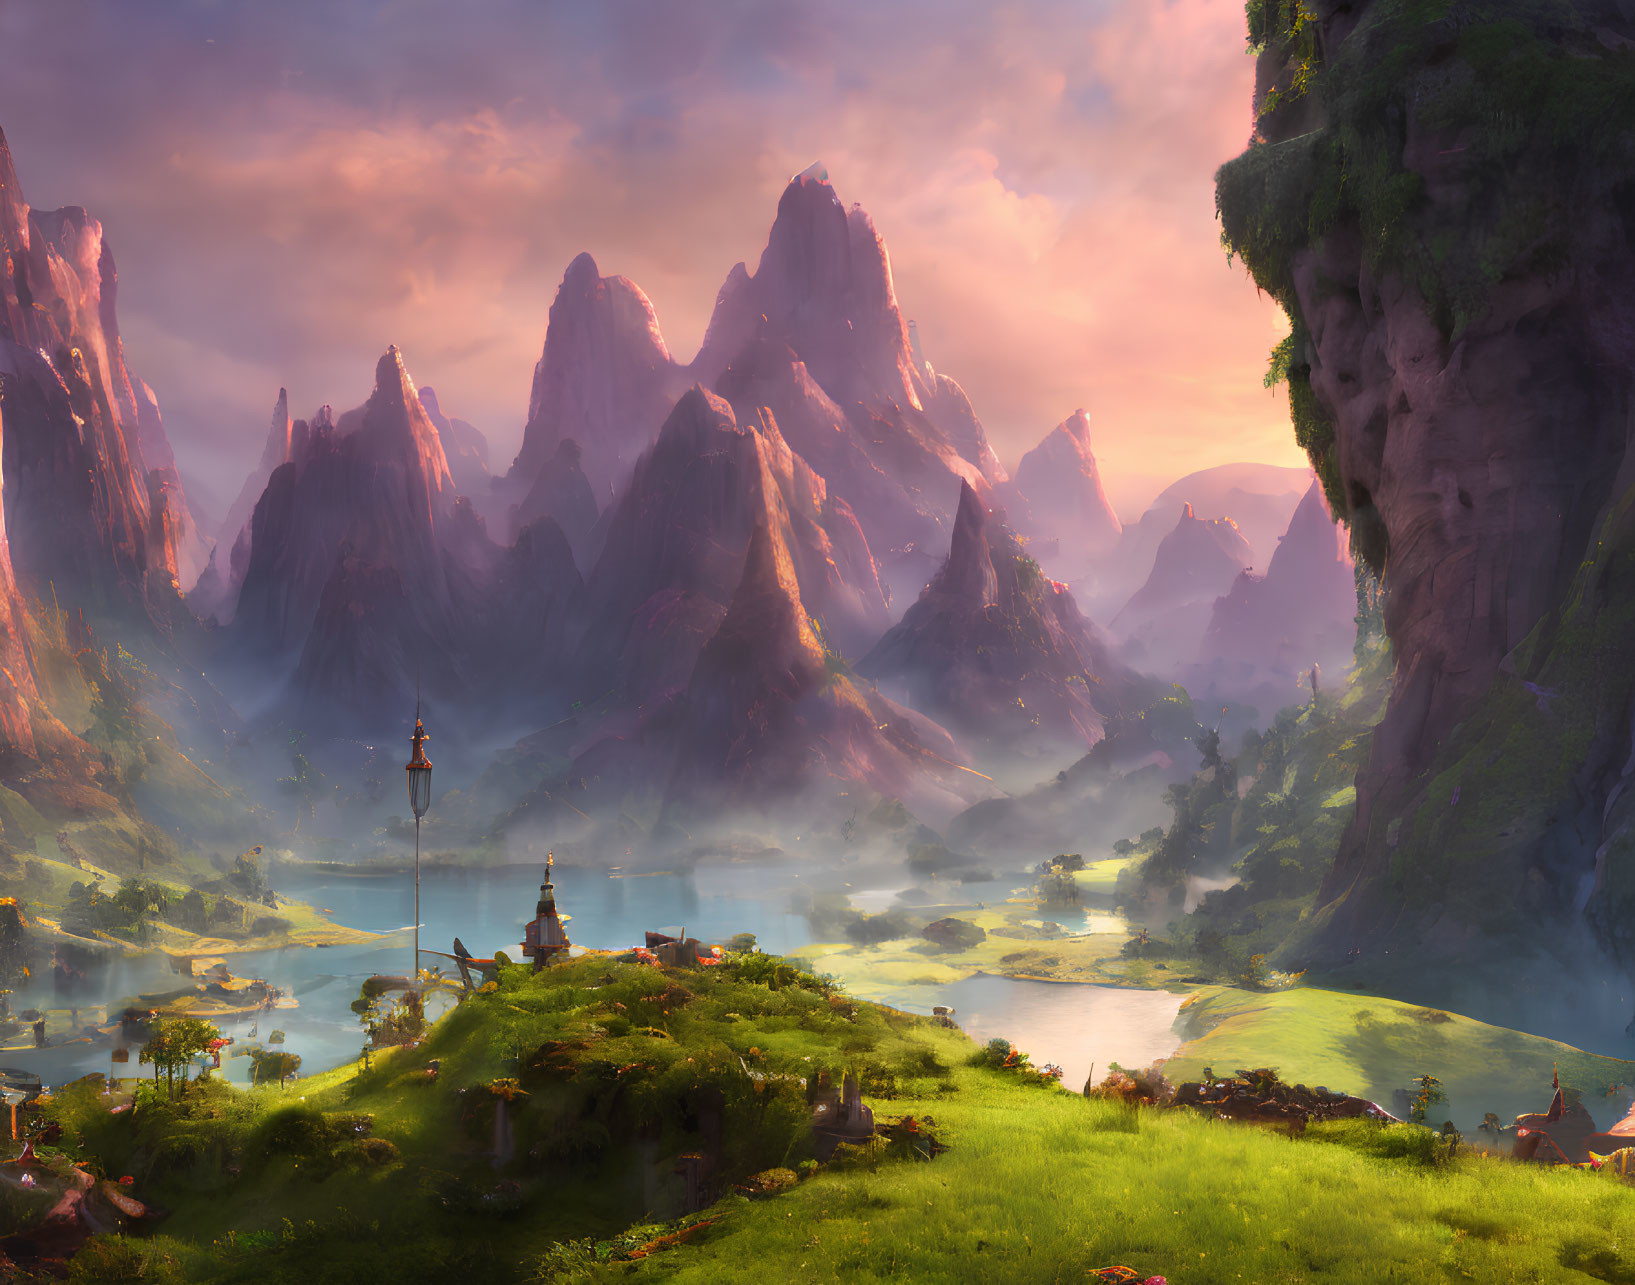 Serene fantasy landscape with mountains, lake, village, and sunset